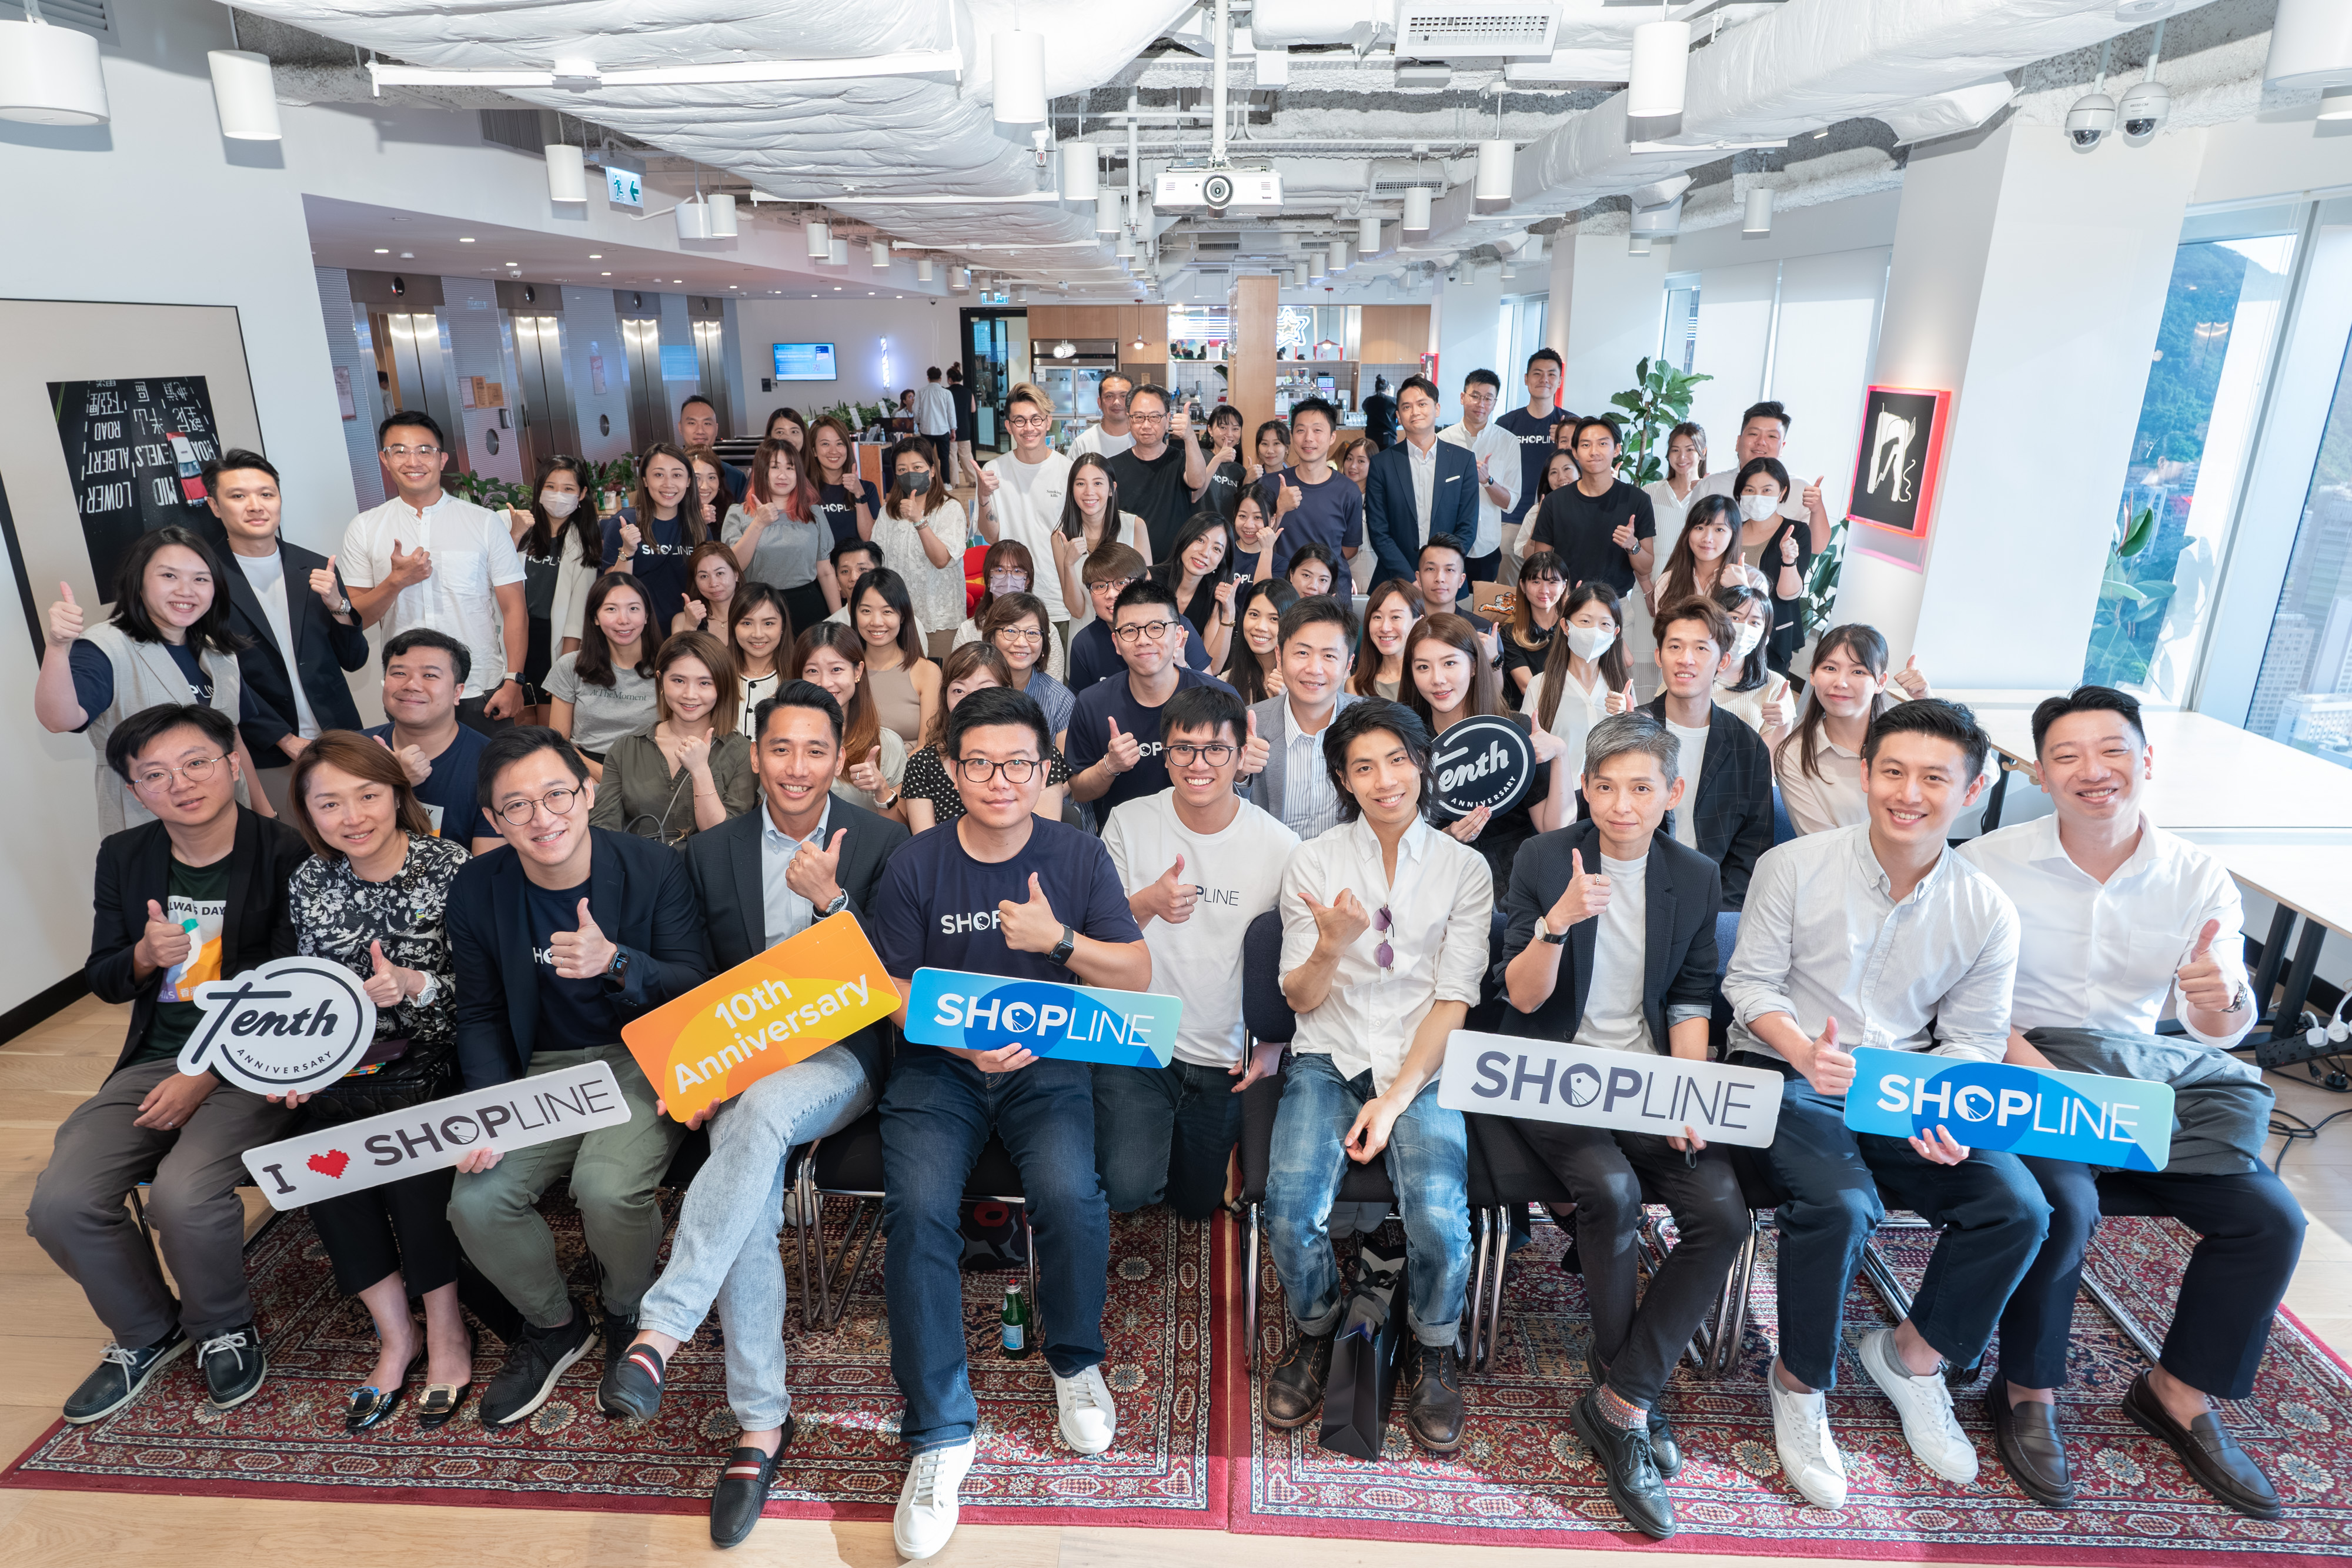 Recently, global smart commerce enabler SHOPLINE held its first New Retail industry networking event at WeWork Hong Kong, inviting top industry leaders from across Asia to explore major industry trends and opportunities in logistics, financing, and advertising, as well as the secrets to successful business operations with representatives from various merchants.